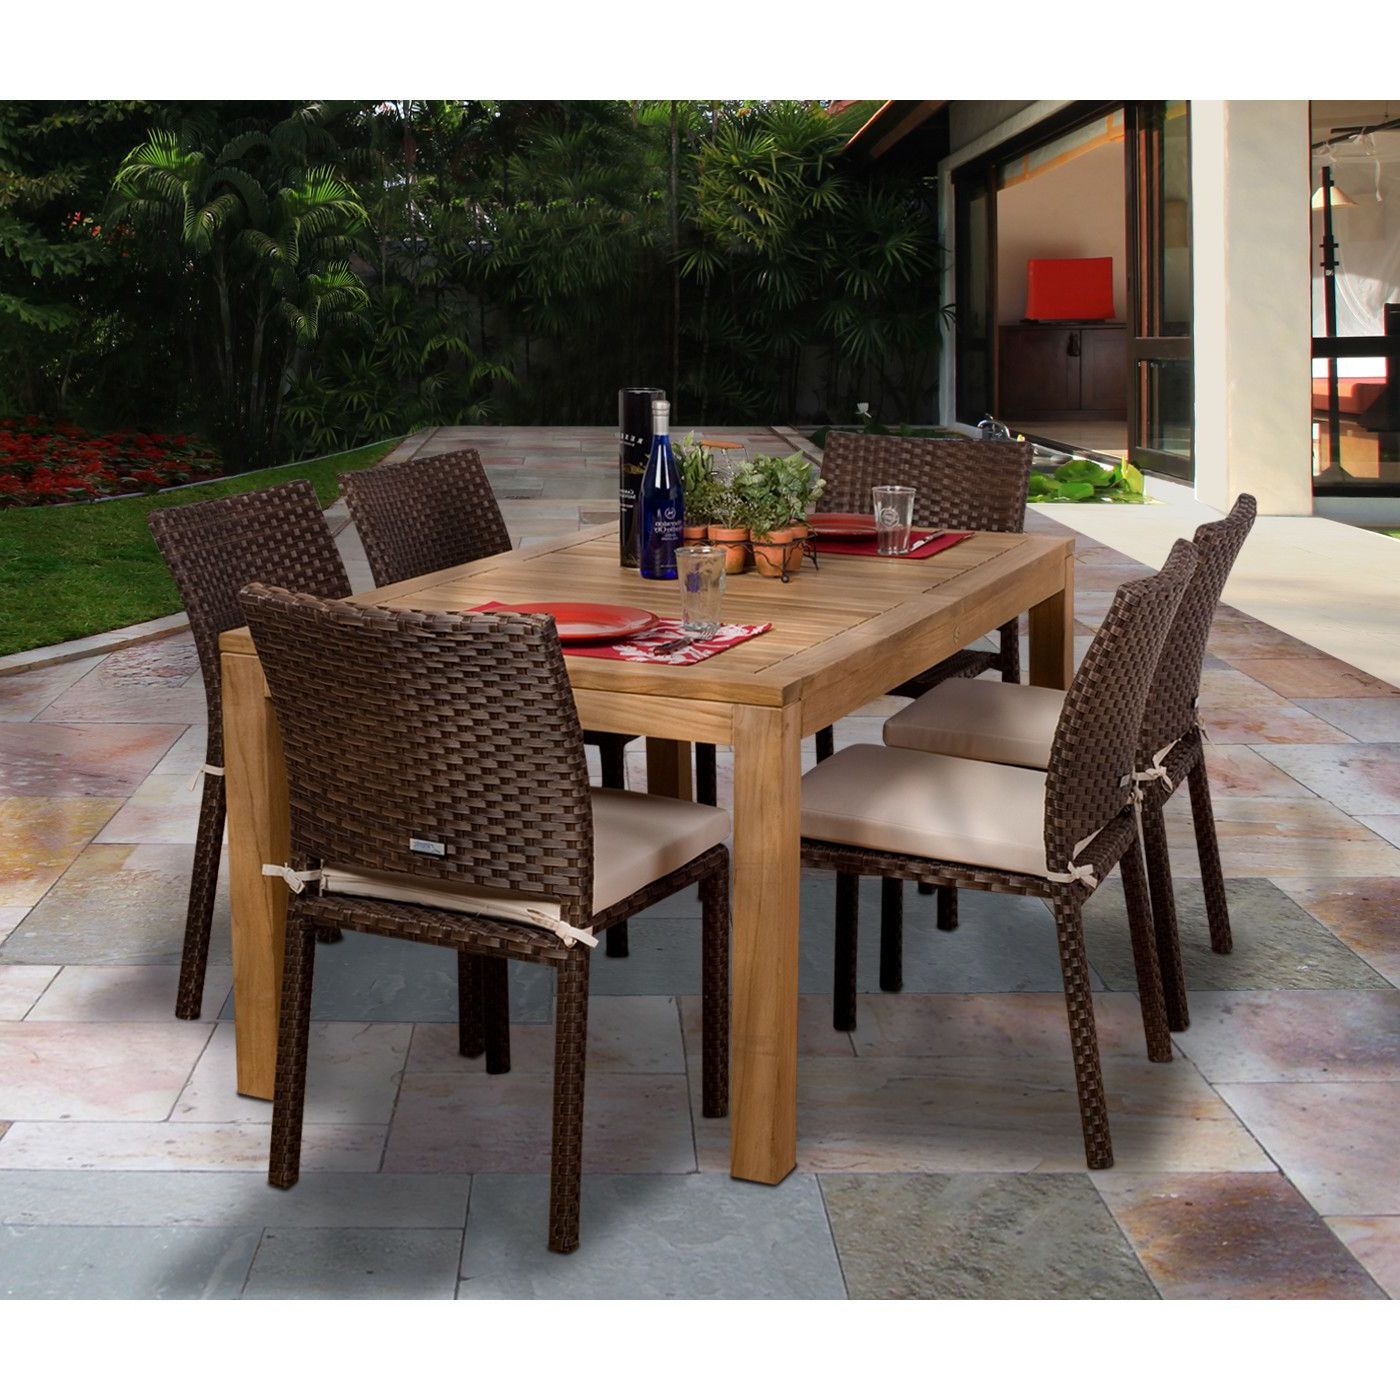 Patio Dining Set Throughout Most Current 7 Pieces Teak Outdoor Dining Sets (View 15 of 15)